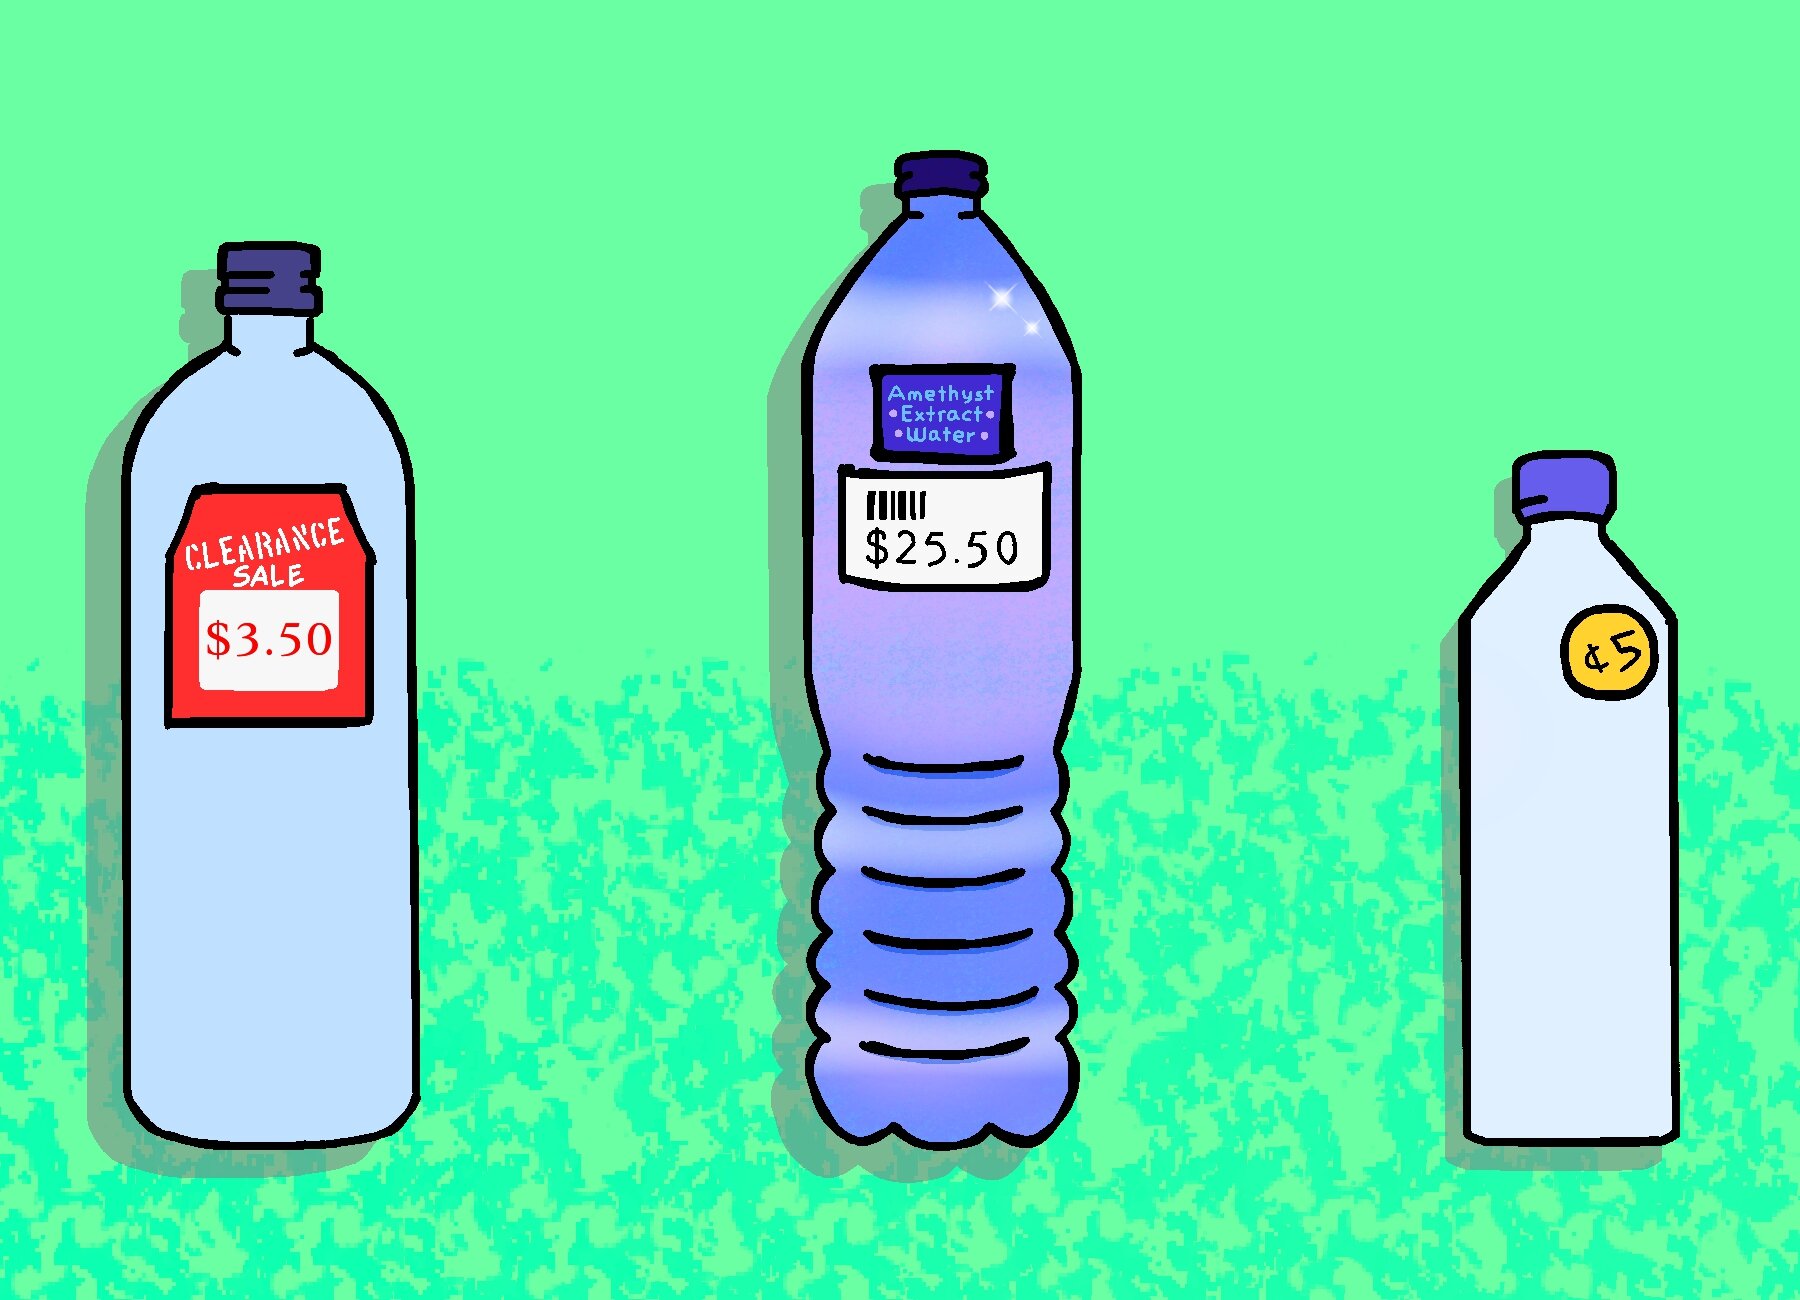 Water is a health-positive alternative to Energy Drinks. This graphic was created by Voices of Youth's Pumpkin King.